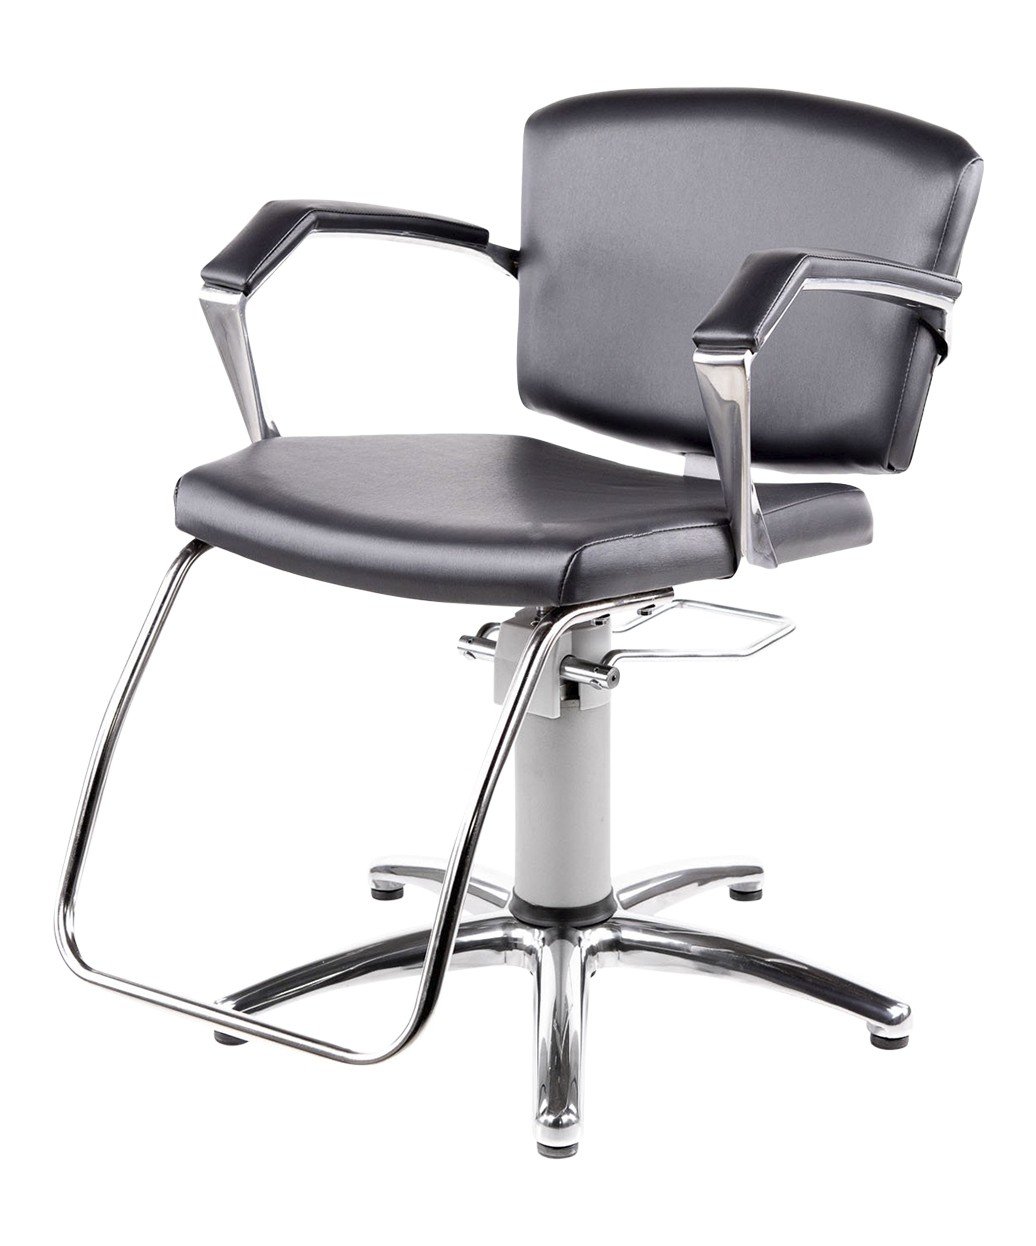 Collins 5201 Adarna Styling Chair